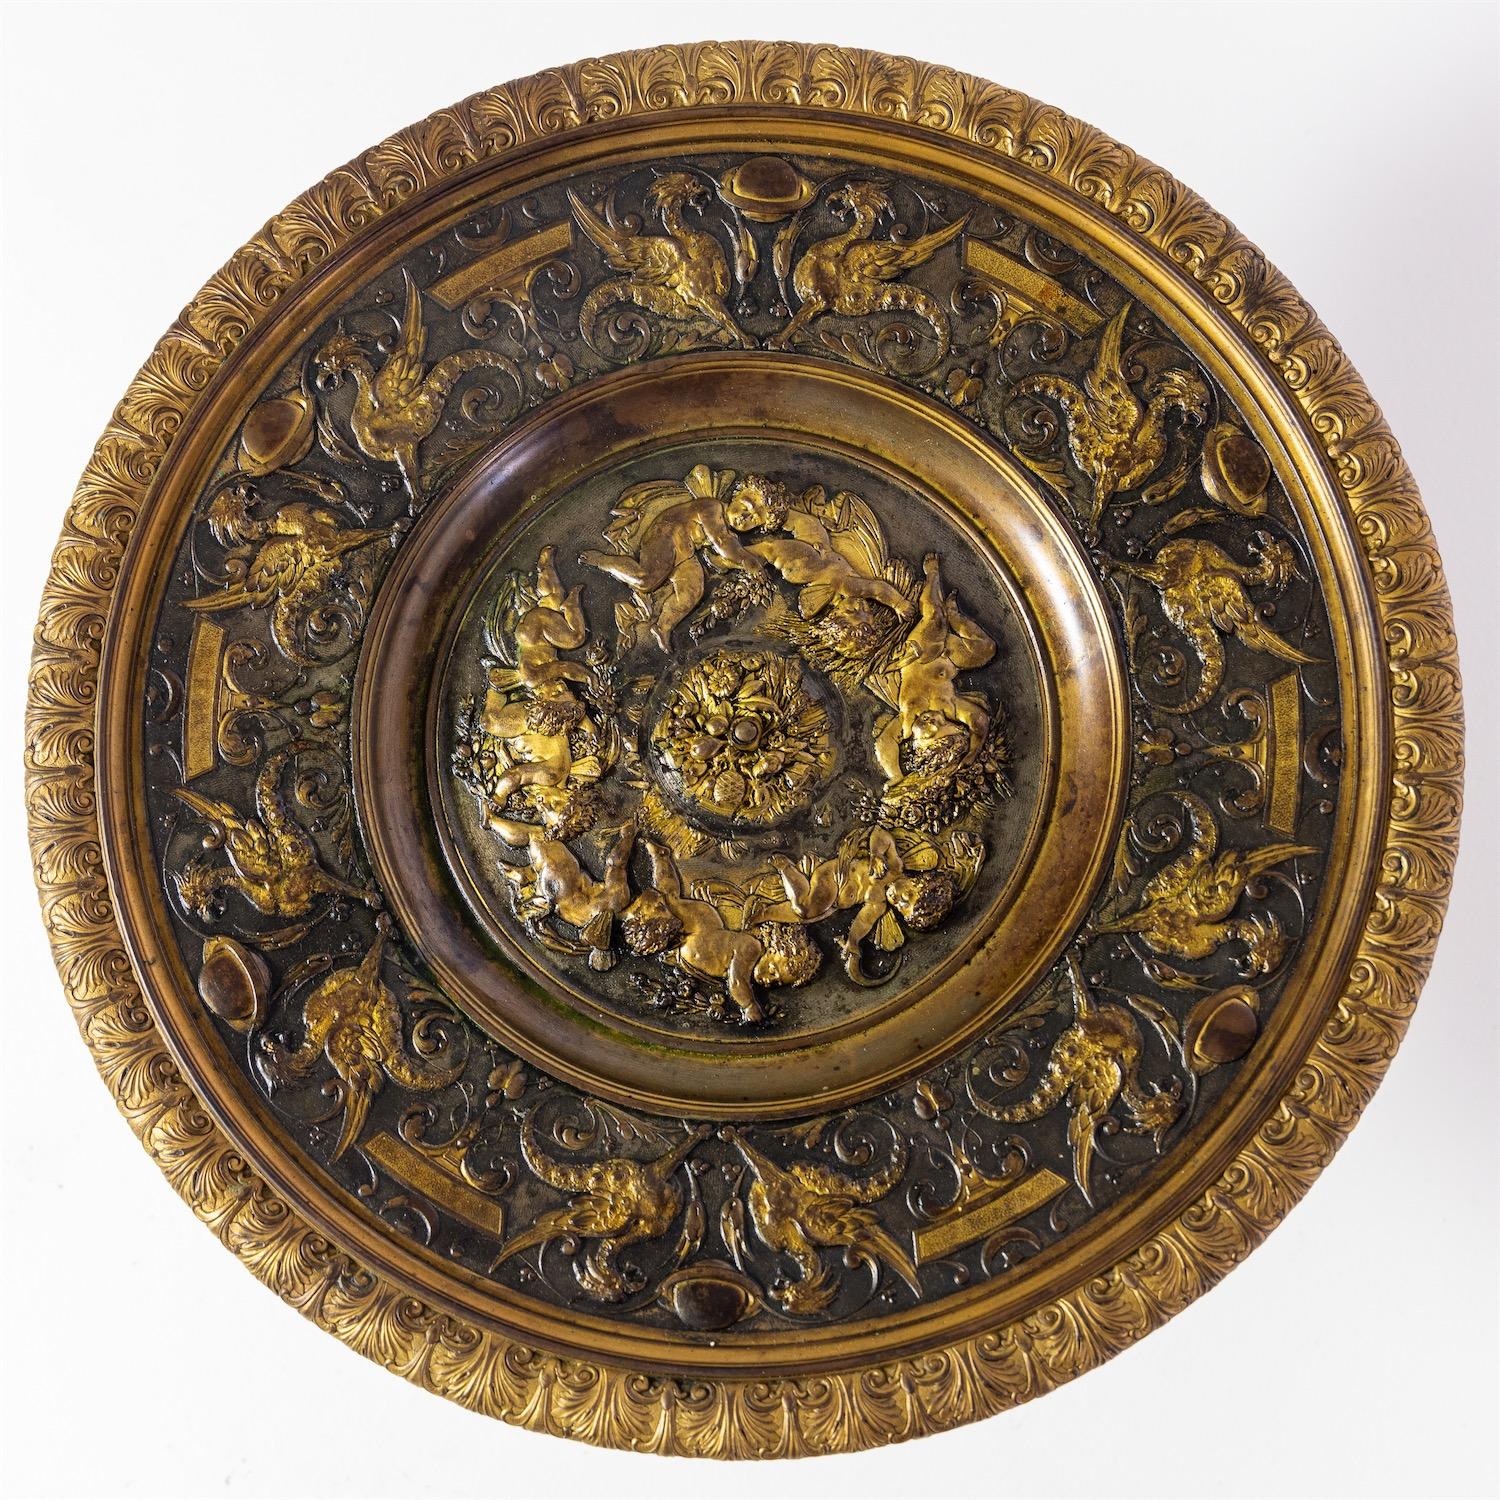 Historism Tazza in Renaissance style made of bronze with putti and griffin decor.